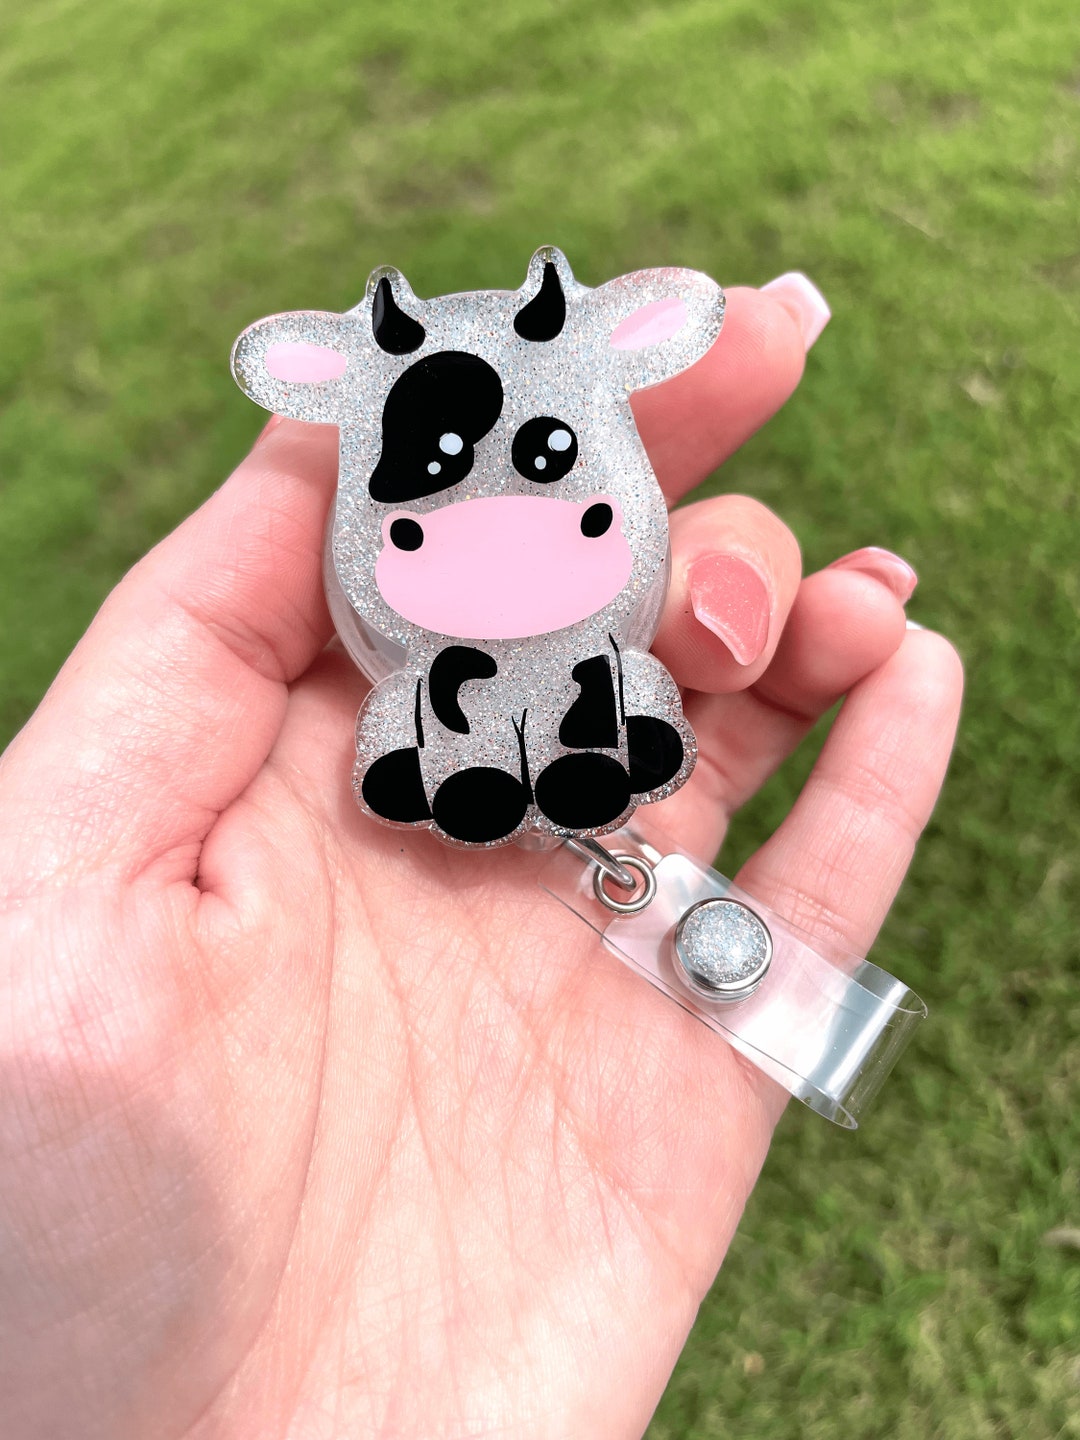 Cow Badge Reel, Cow Badge Holder, Cow Badge Buddy, Animal Badge Reel,  Summer Name Tag Holder, Cow Badge Clip 